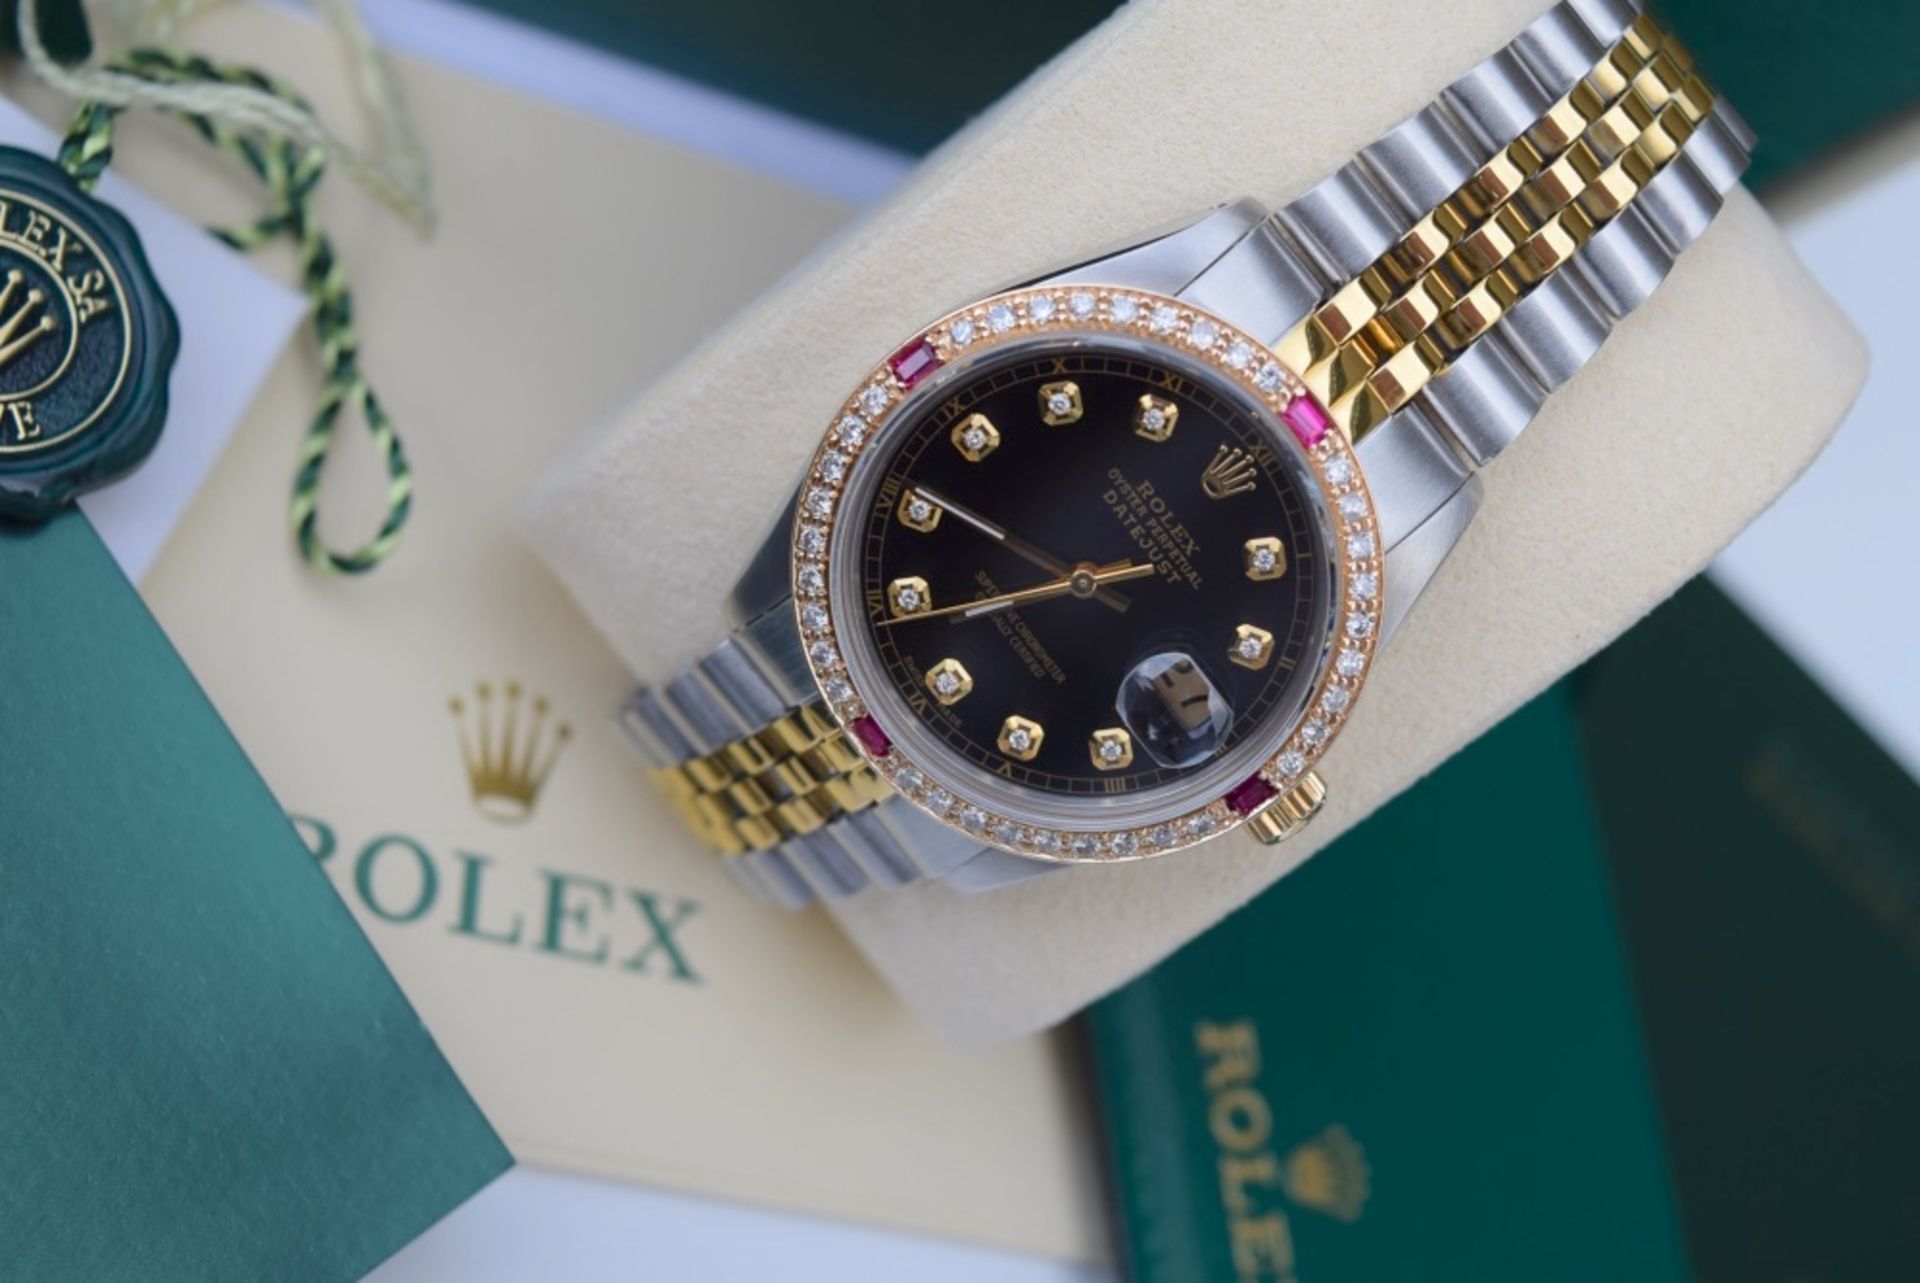 Rolex DateJust 36mm Gents Model - Ruby & Diamond (Black Dial) - Automatic - Image 7 of 9